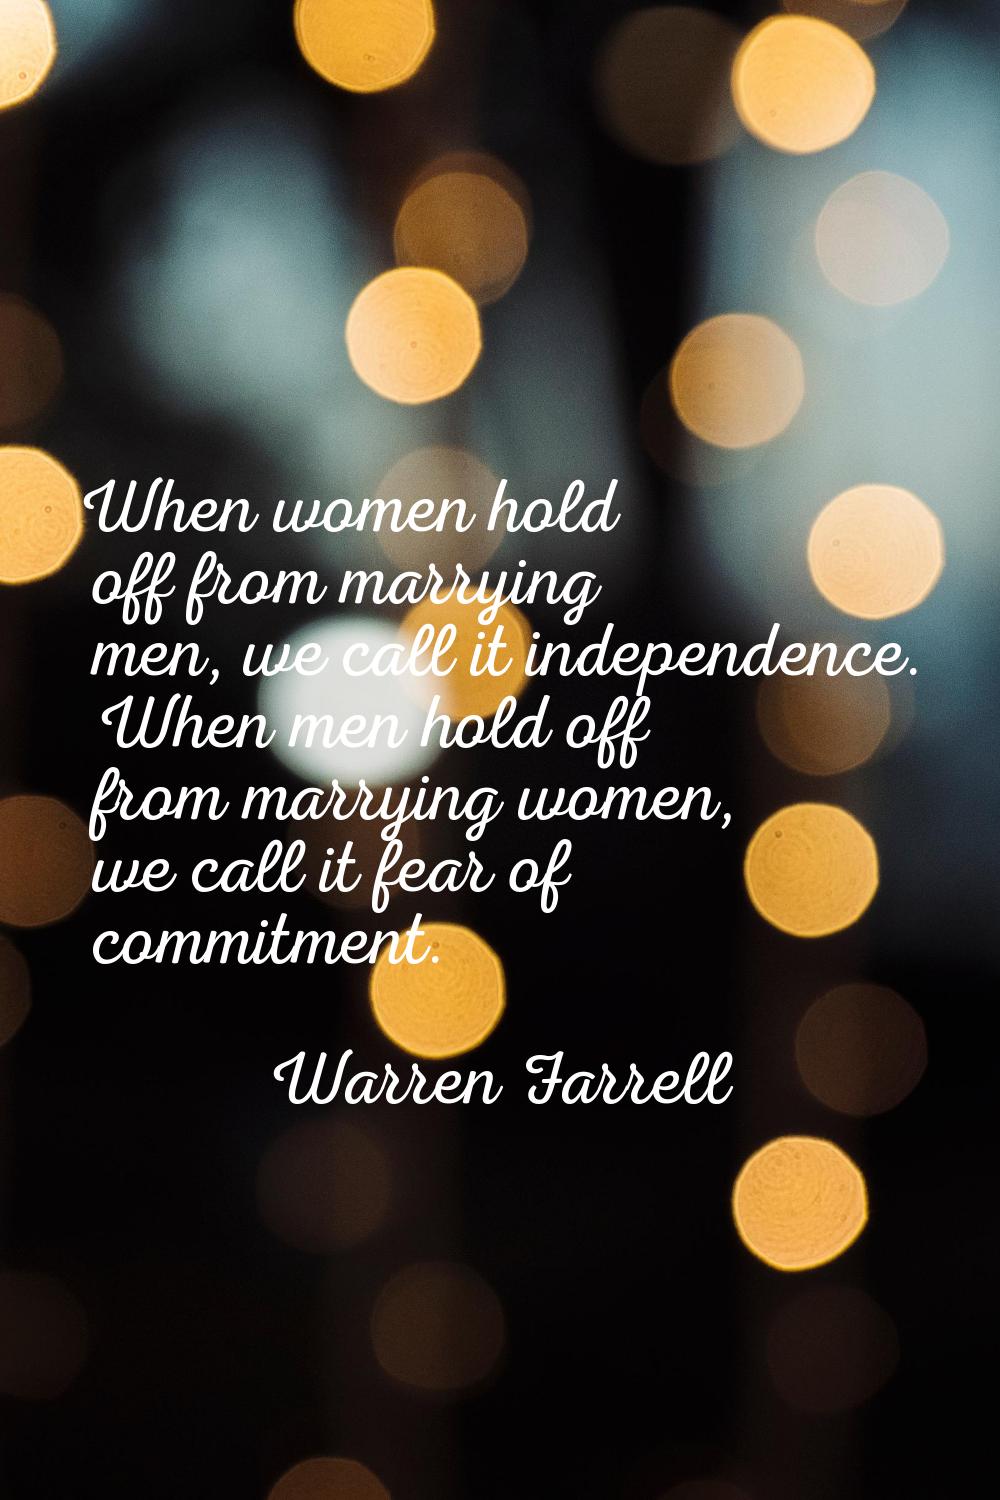 When women hold off from marrying men, we call it independence. When men hold off from marrying wom